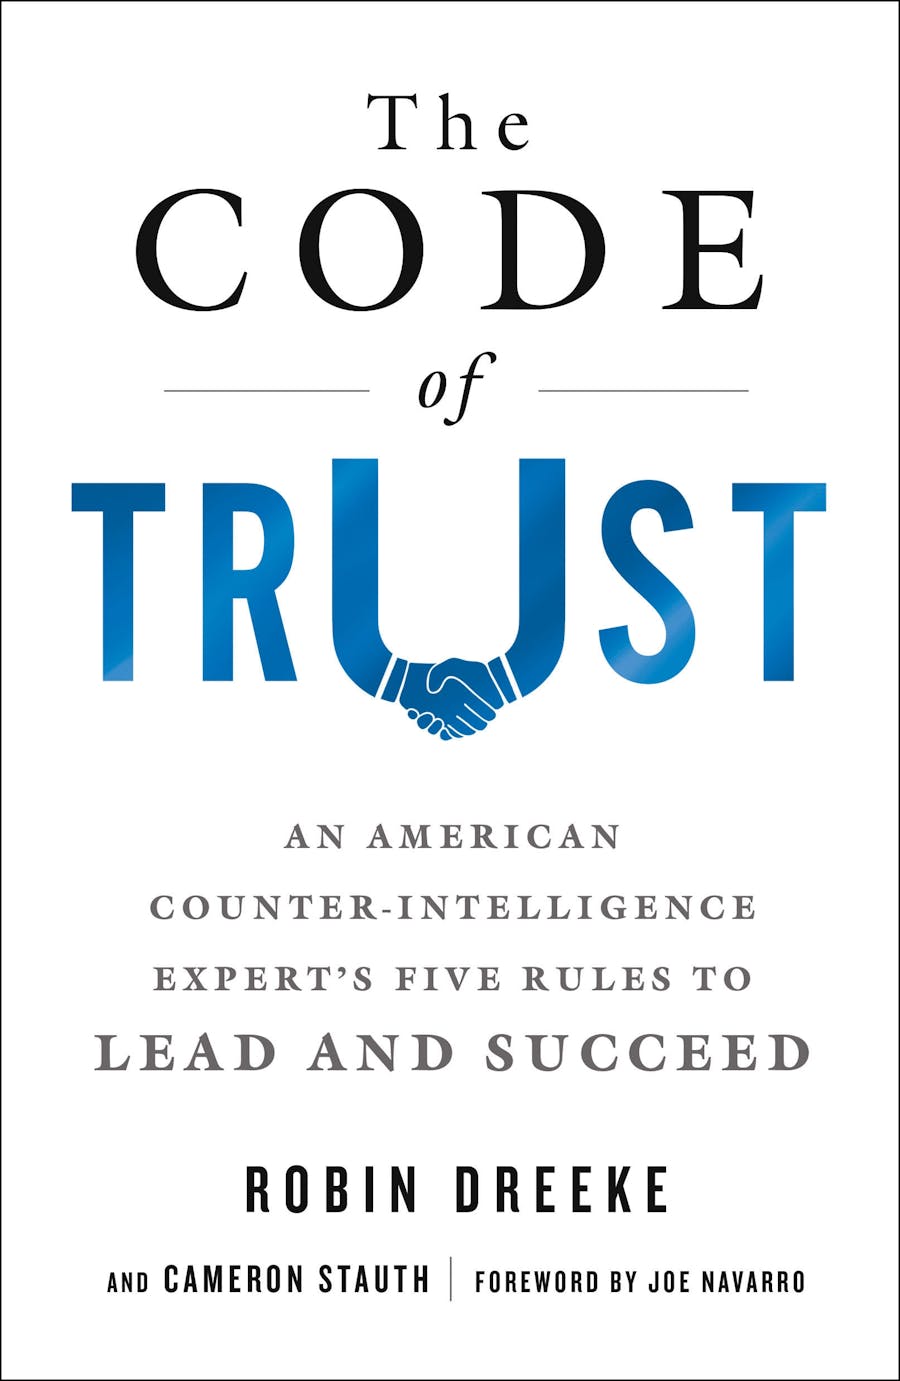 The Code of Trust by Robin Dreeke and Cameron Stauth; Foreword by Joe Navarro